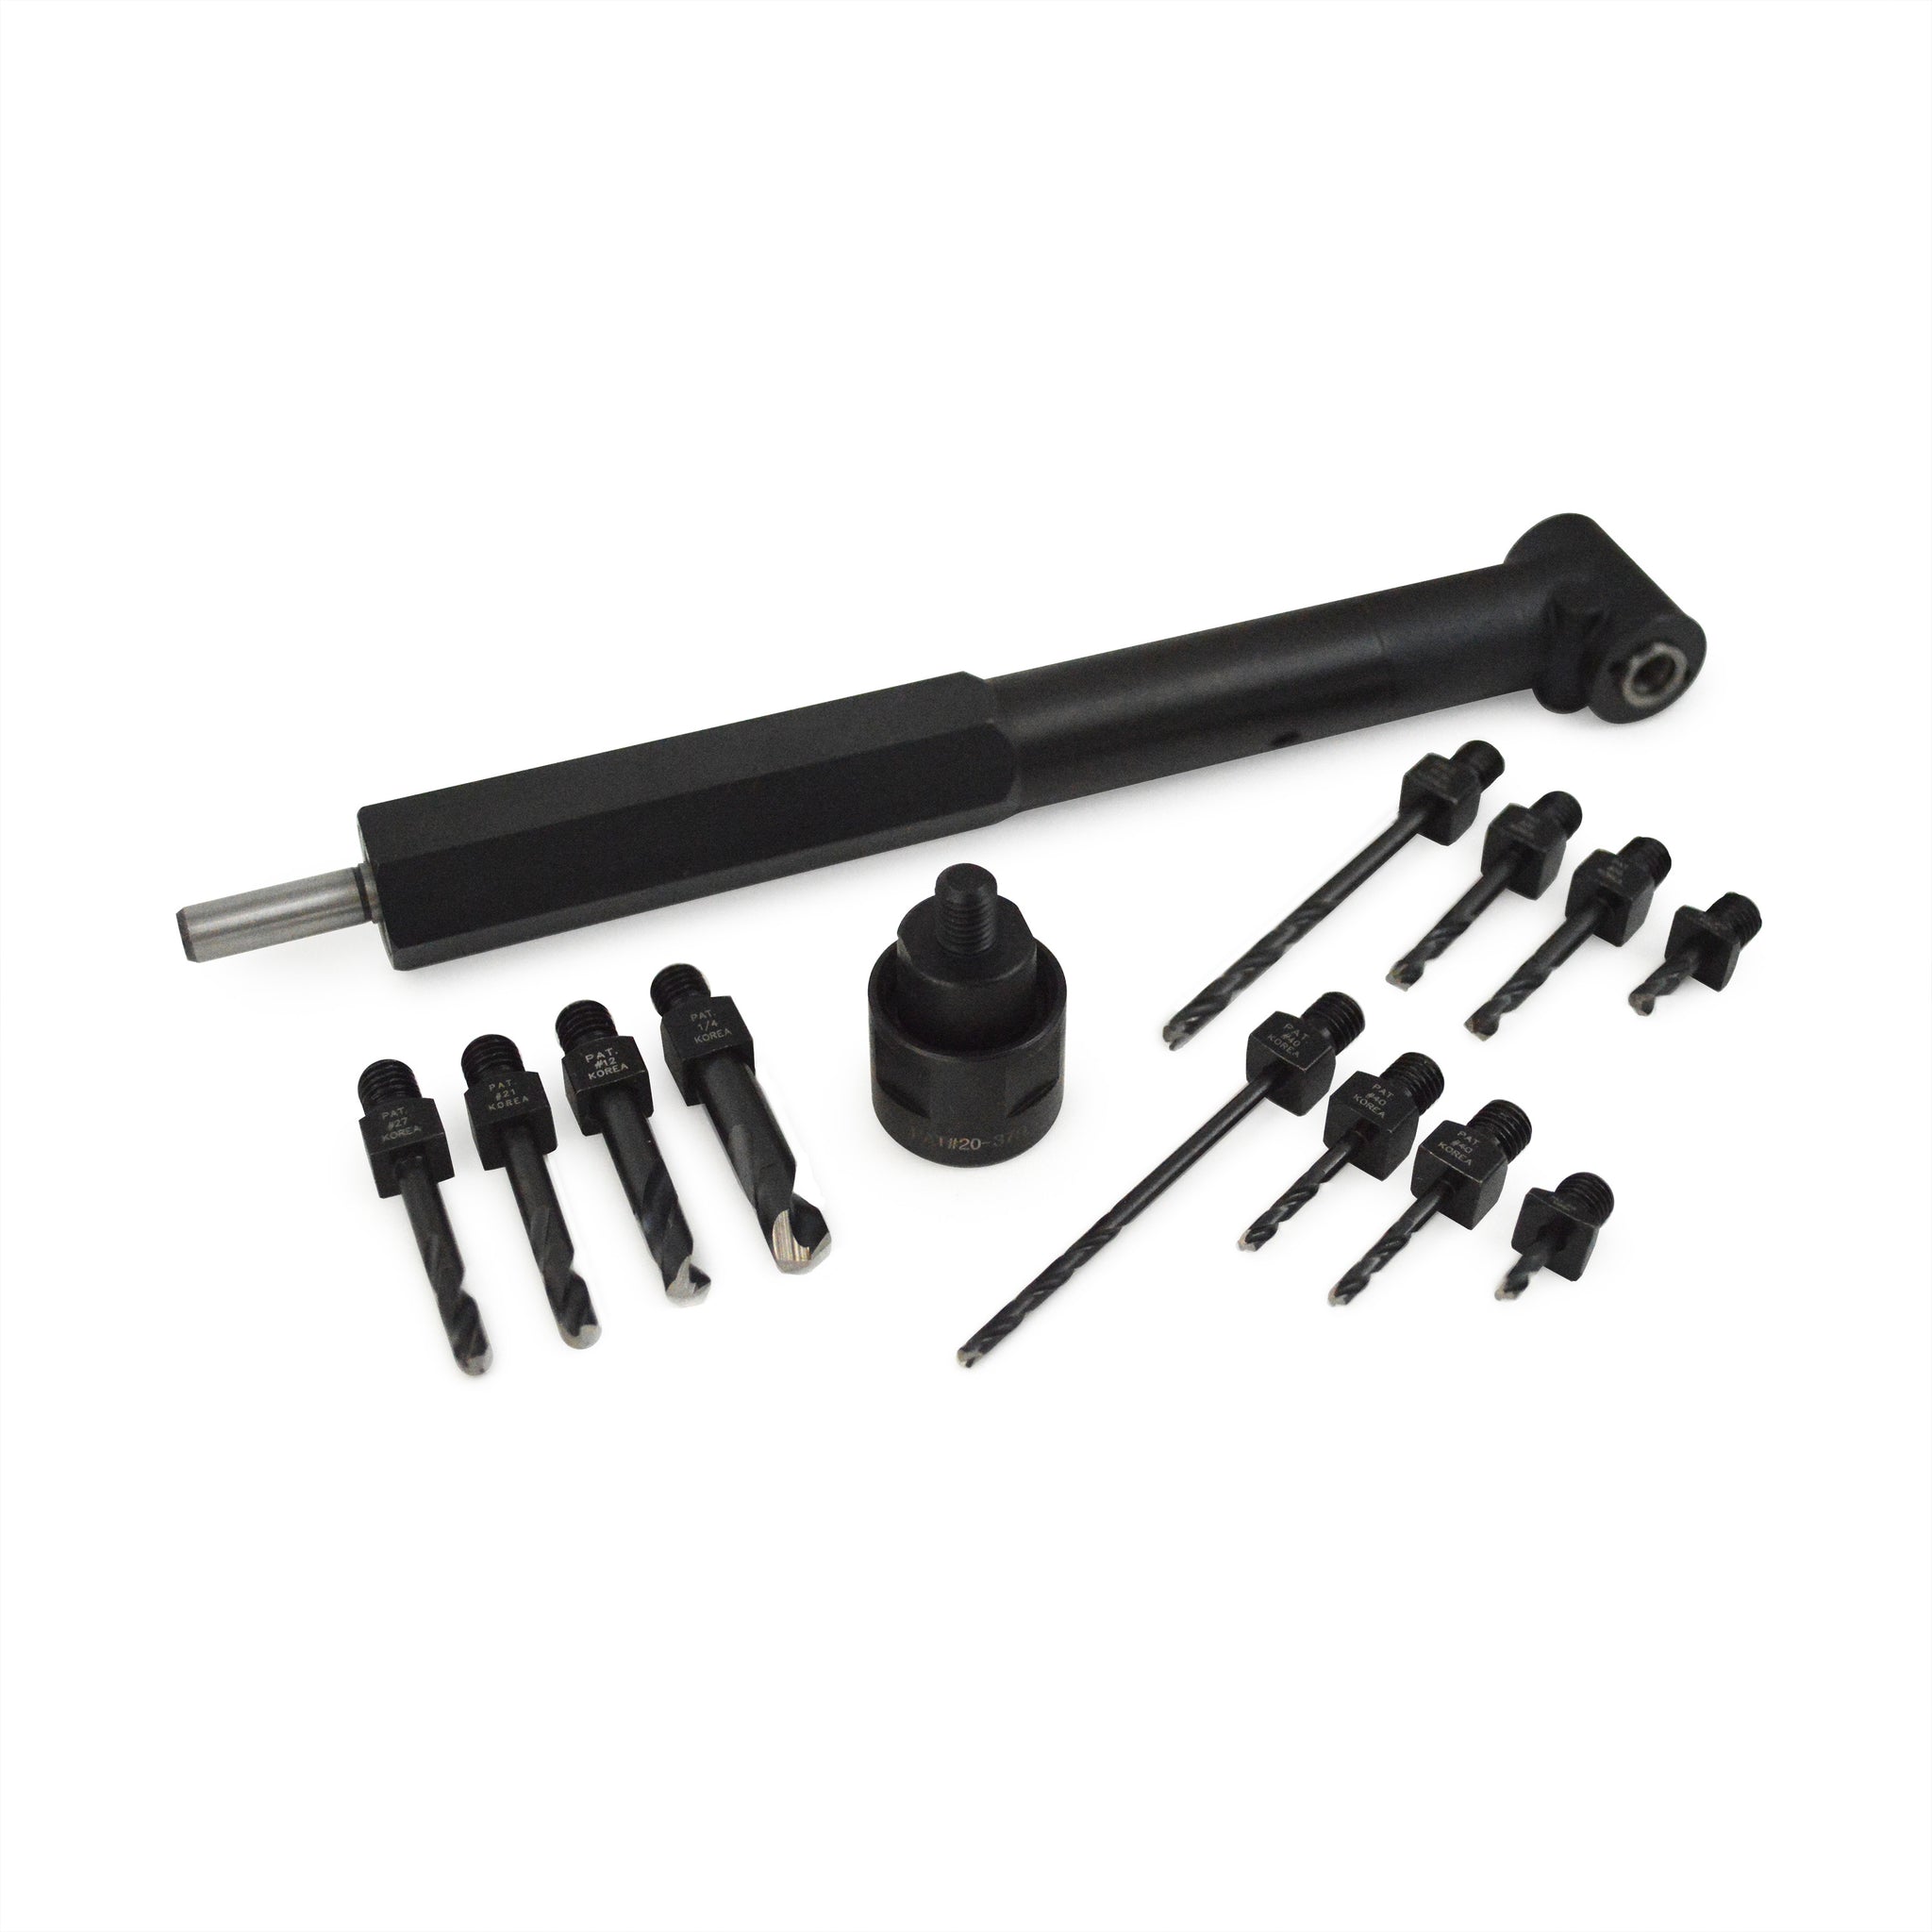 Toolkit - Angle Drill Attachment Kit – Cleaveland Aircraft Tool